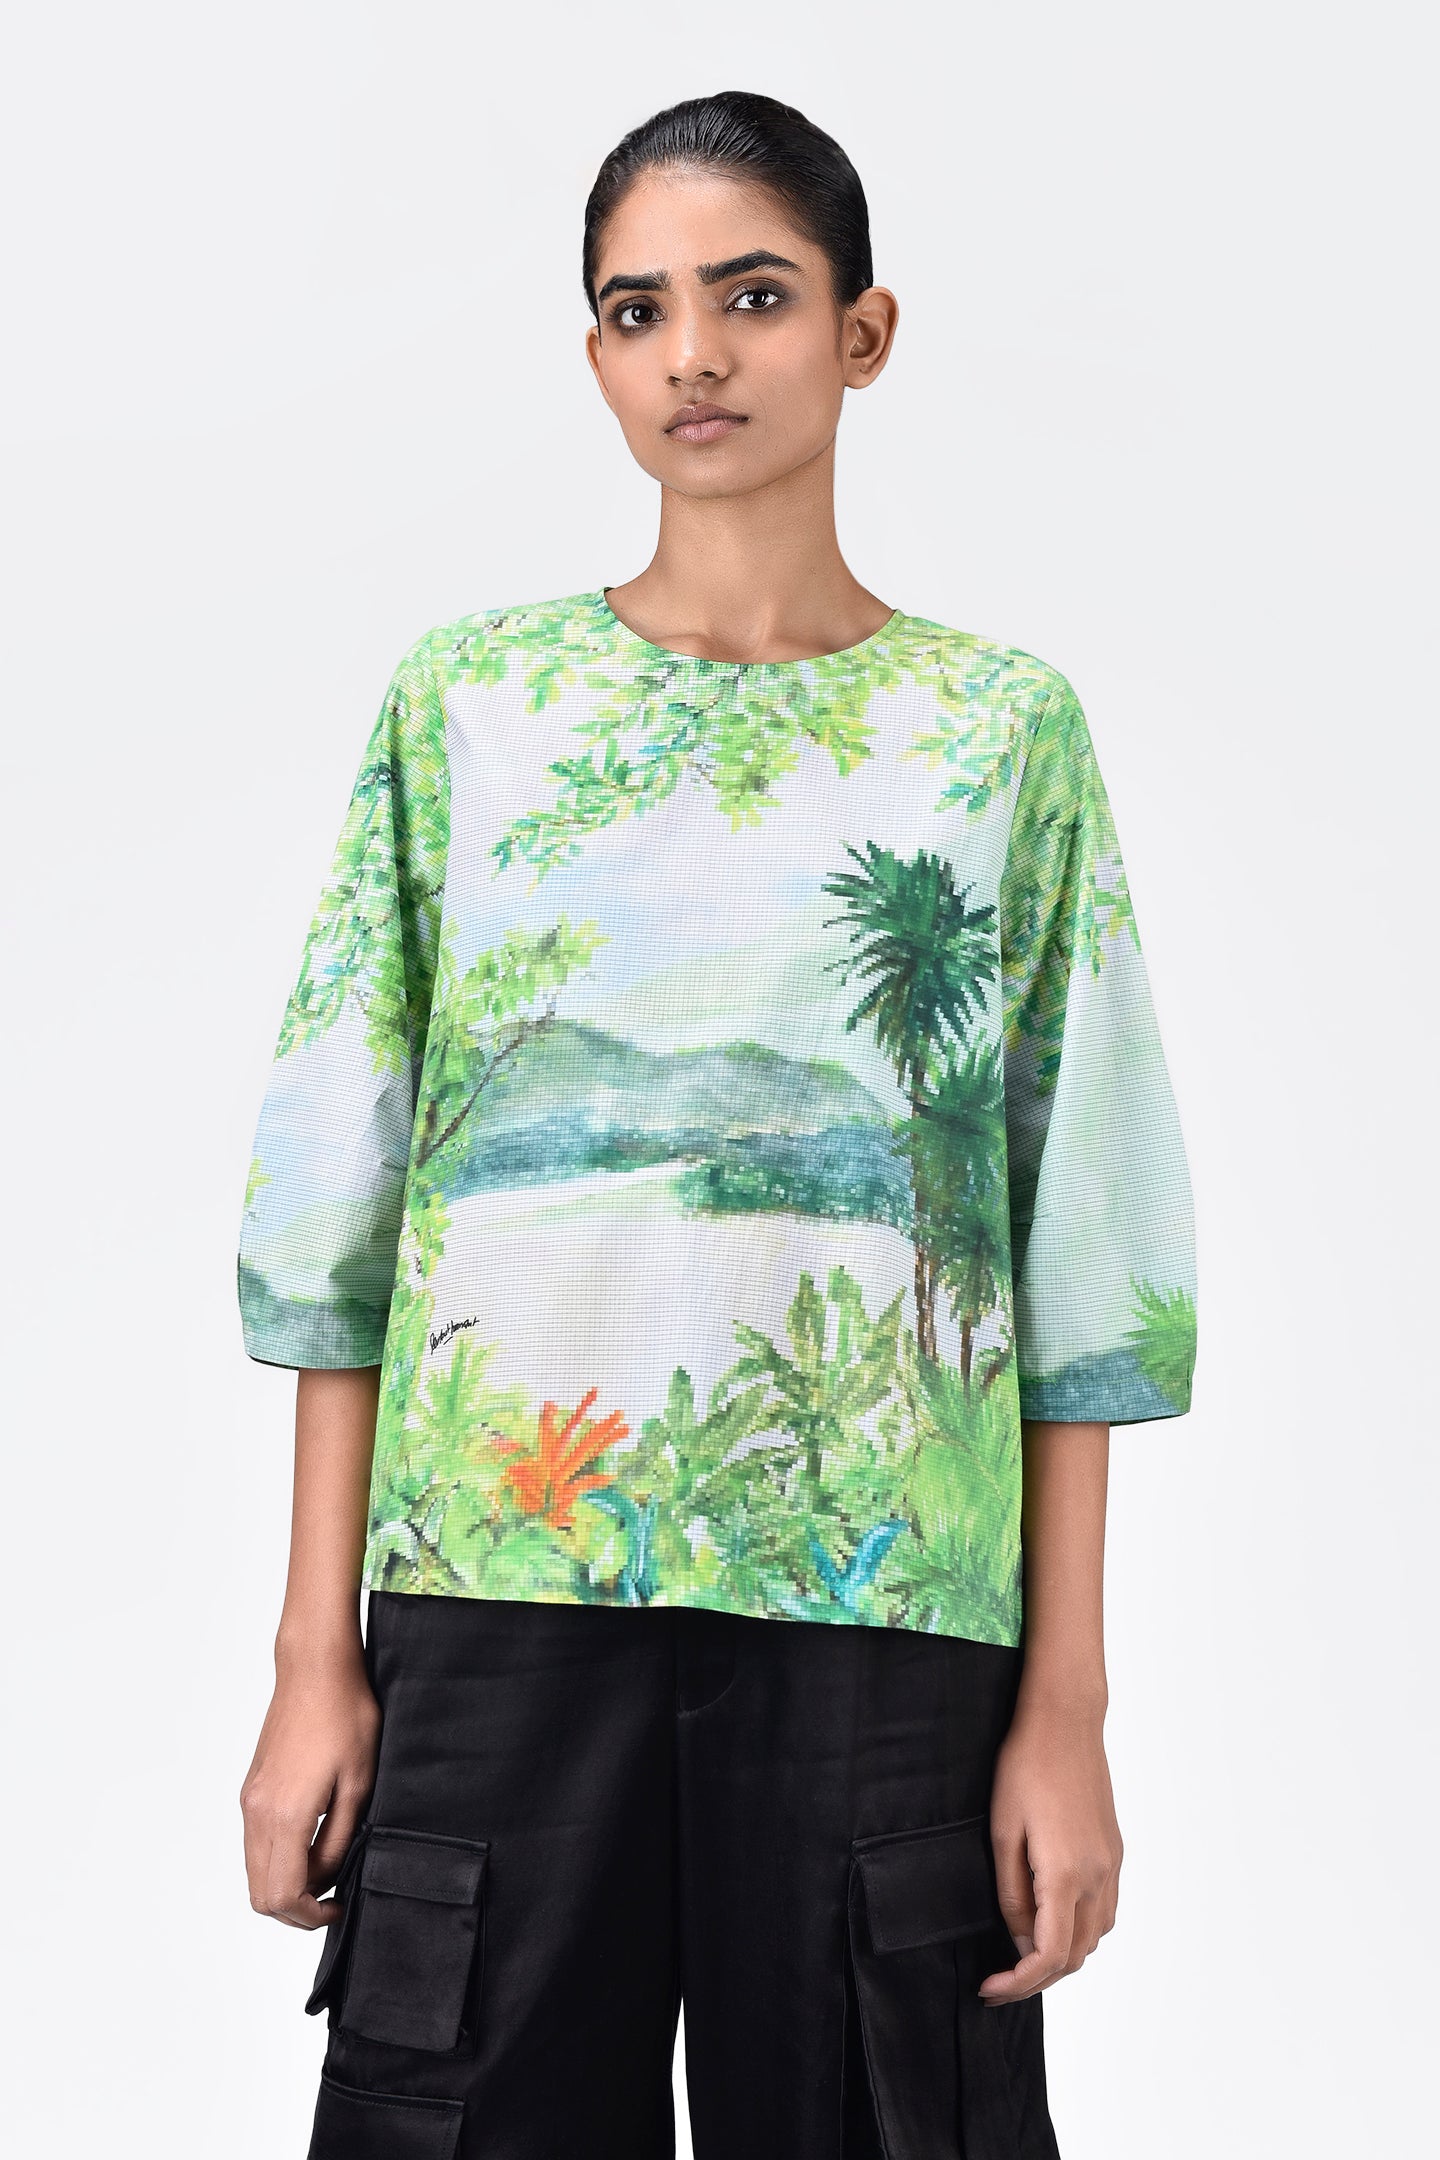 Landscape Print Top with Rounded Sleeves